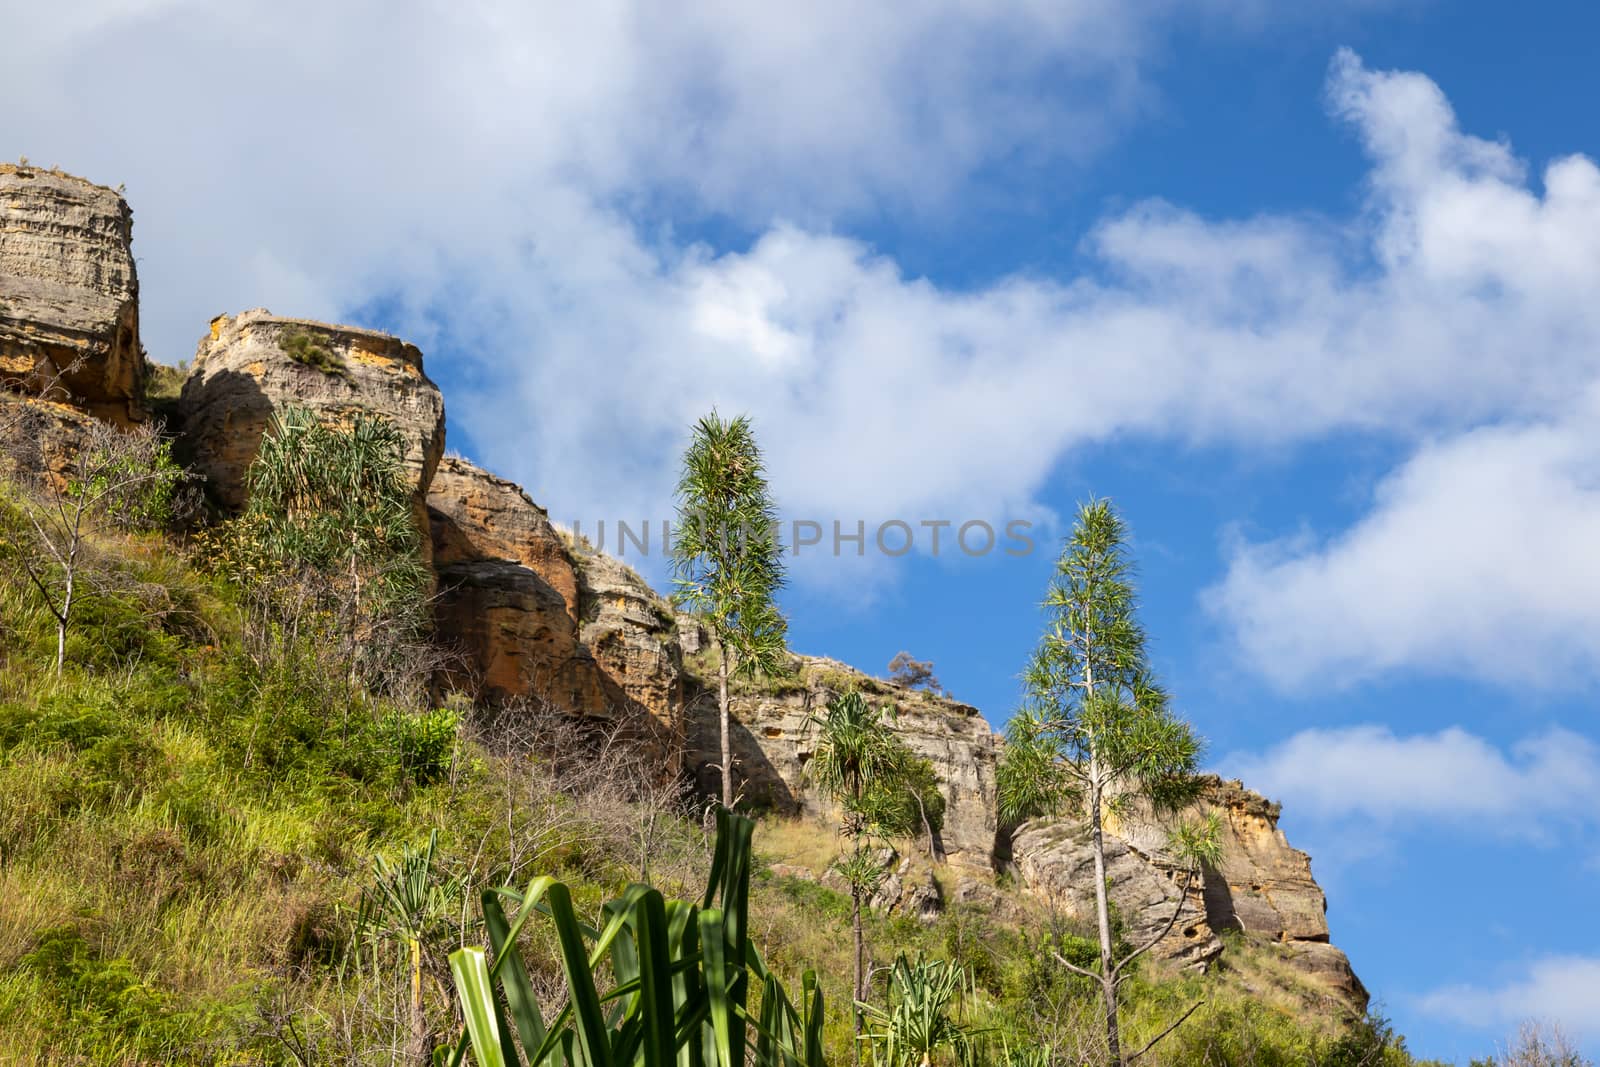 The Mountains covered with plants and a blue sky with small clouds